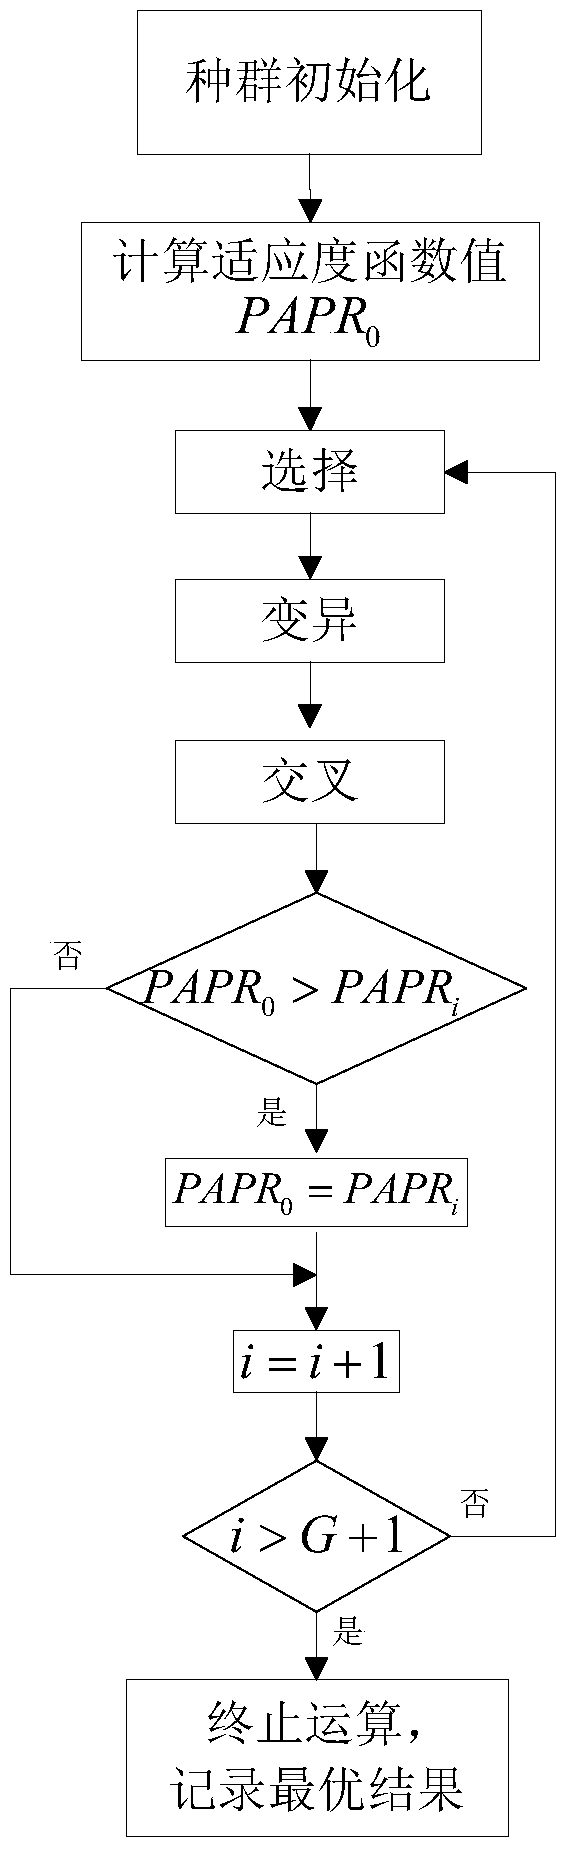 A Method for Reducing Peak-to-Average Power Ratio of Transform Domain Communication System